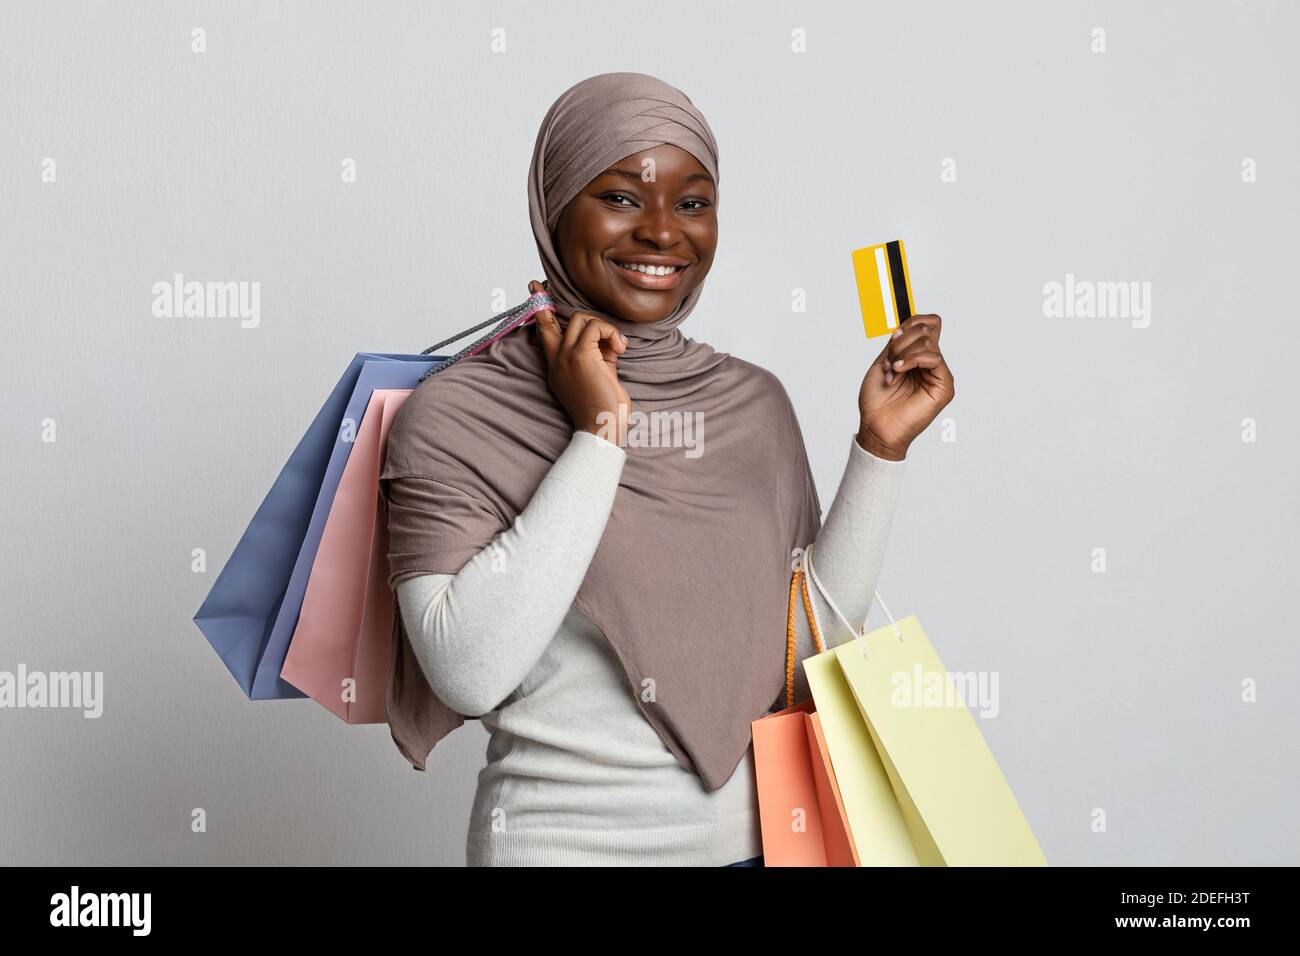 Smiling Black Muslim Woman In Hijab Holding Shopping Bags And Credit Card Stock Photo